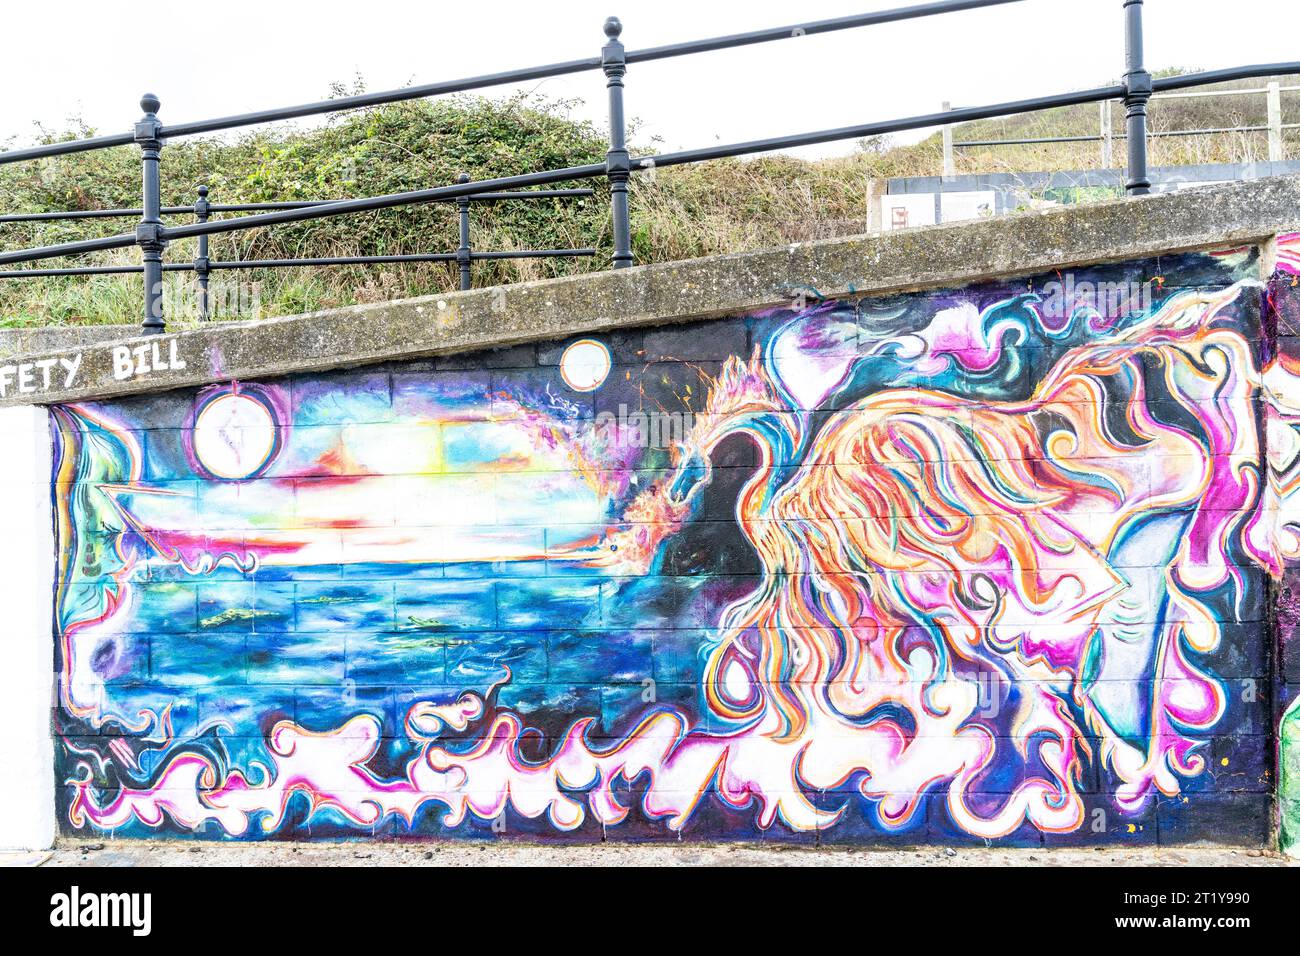 Seafront graffiti on a seawall at Herne Bay in the form of a highly detailed painting of a fire breathing dragon at the edge of the sea with a white moons or suns above. Painted by an unknown young woman. The painting is one of a series interlinked by a common horizon along the wall. Stock Photo